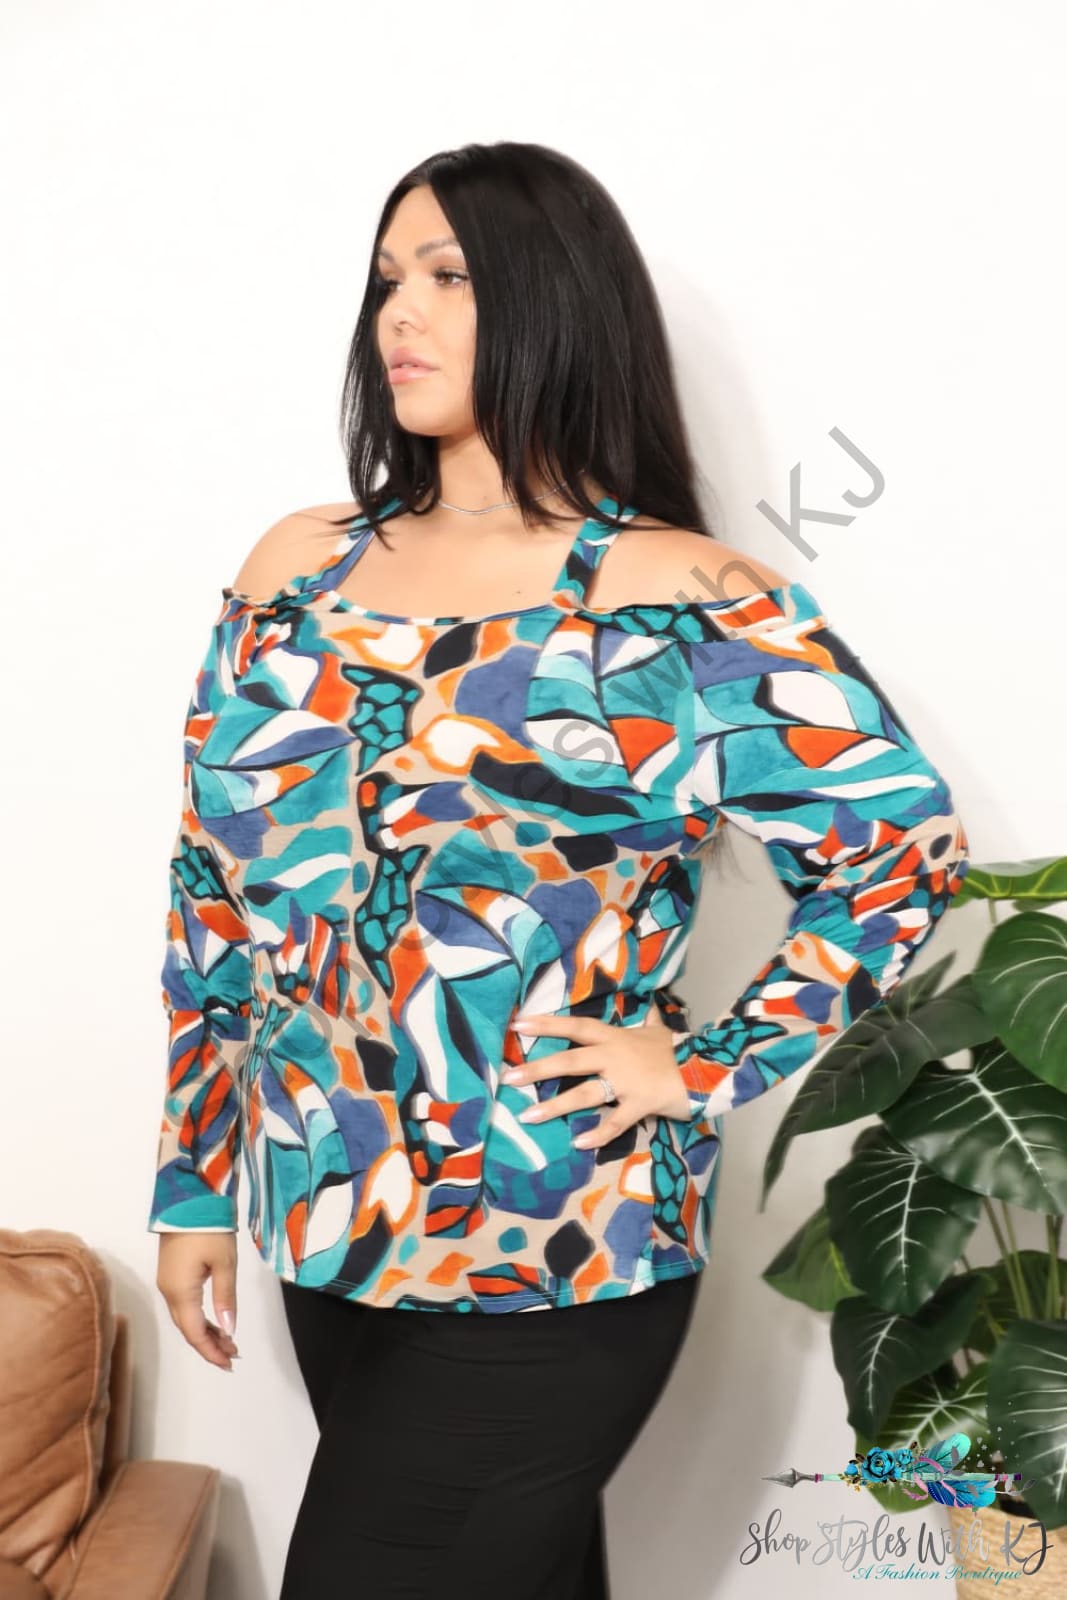 Sew In Love Full Size High Neck Off Shoulder Criss Cross Top Shirts & Tops